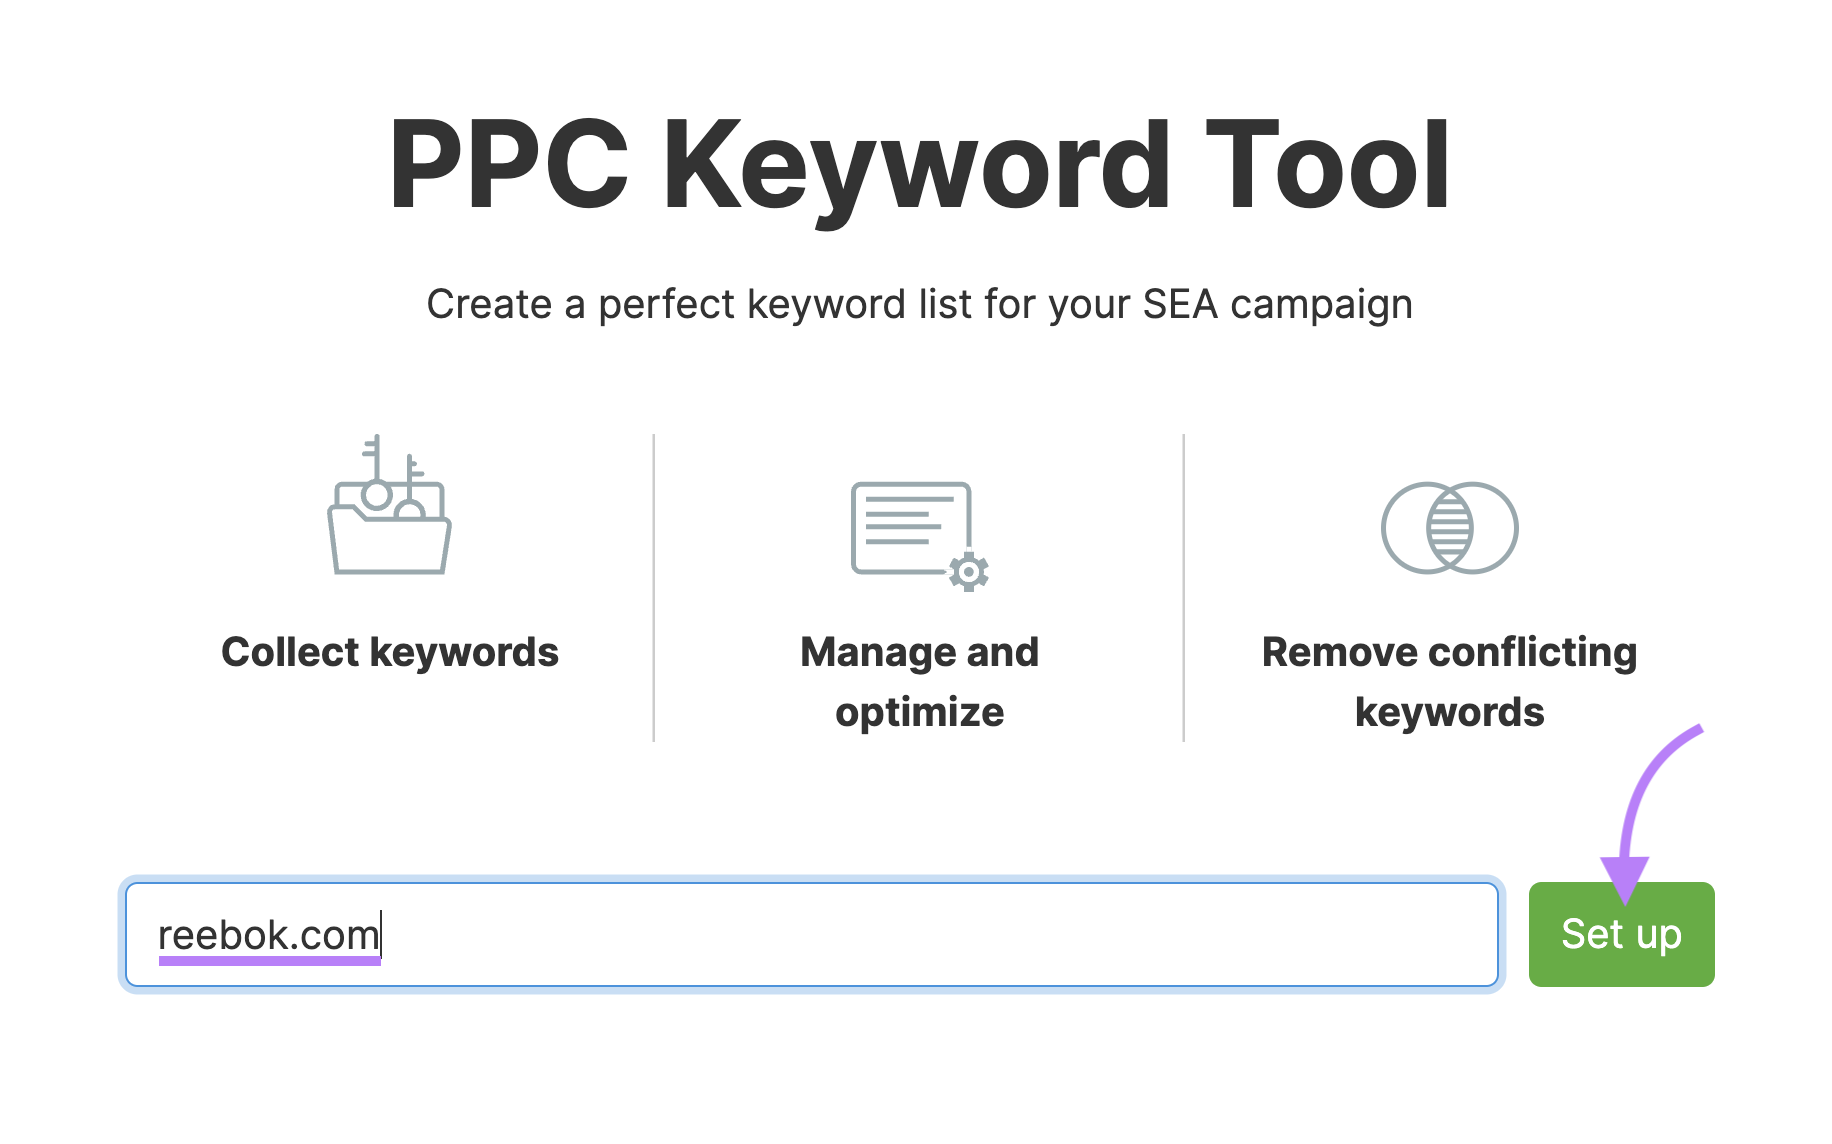 "reebook.com" entered into the PPC Keyword Tool search bar